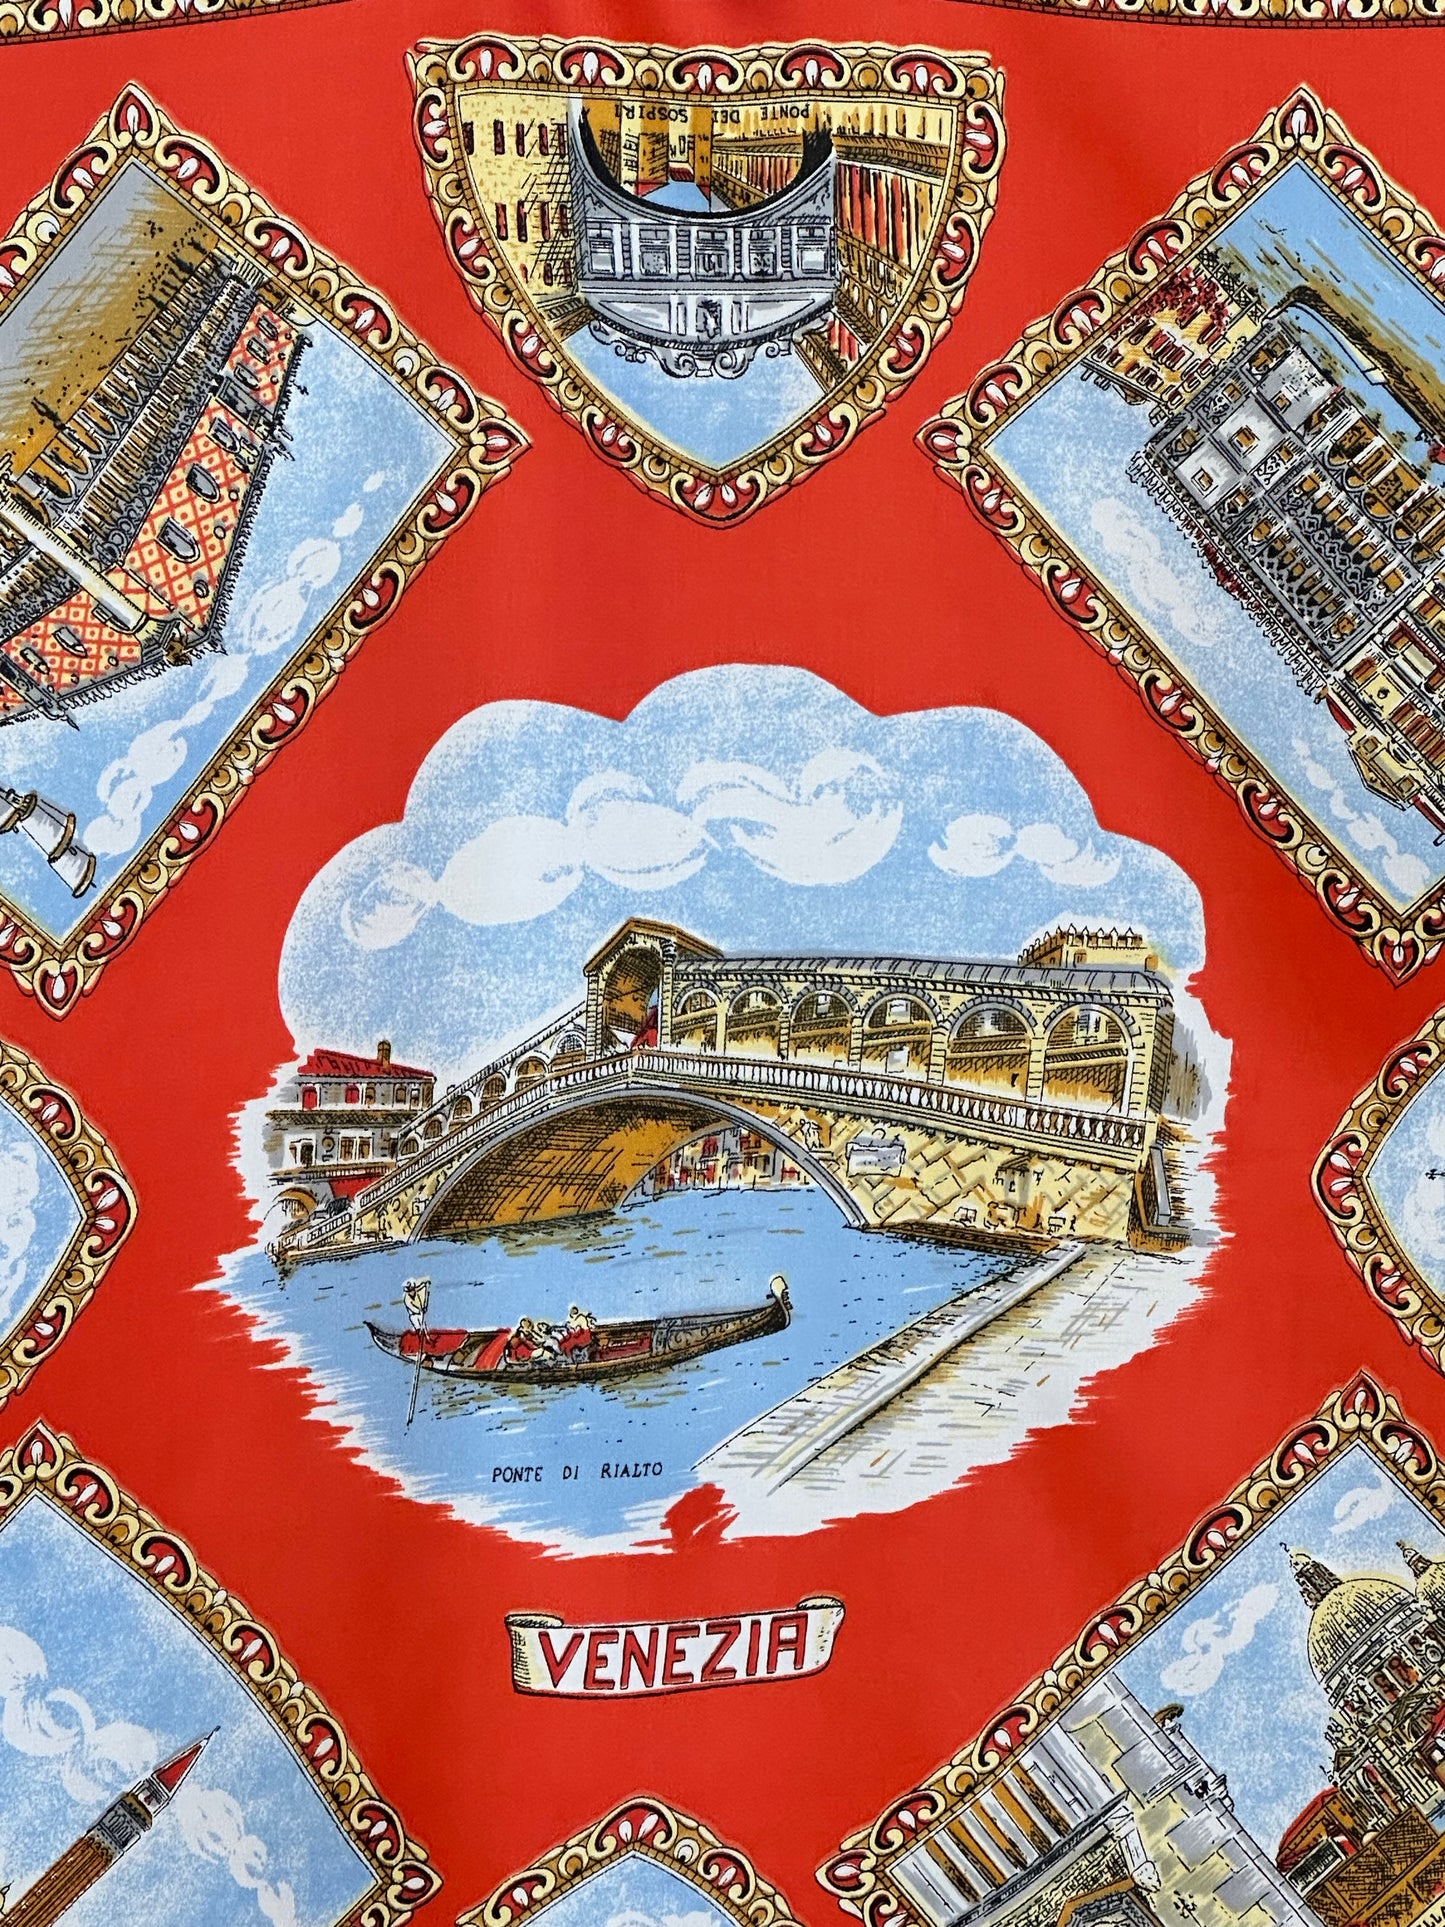 Made in Italy - Vintage Venice Scarf - 24" x 24"